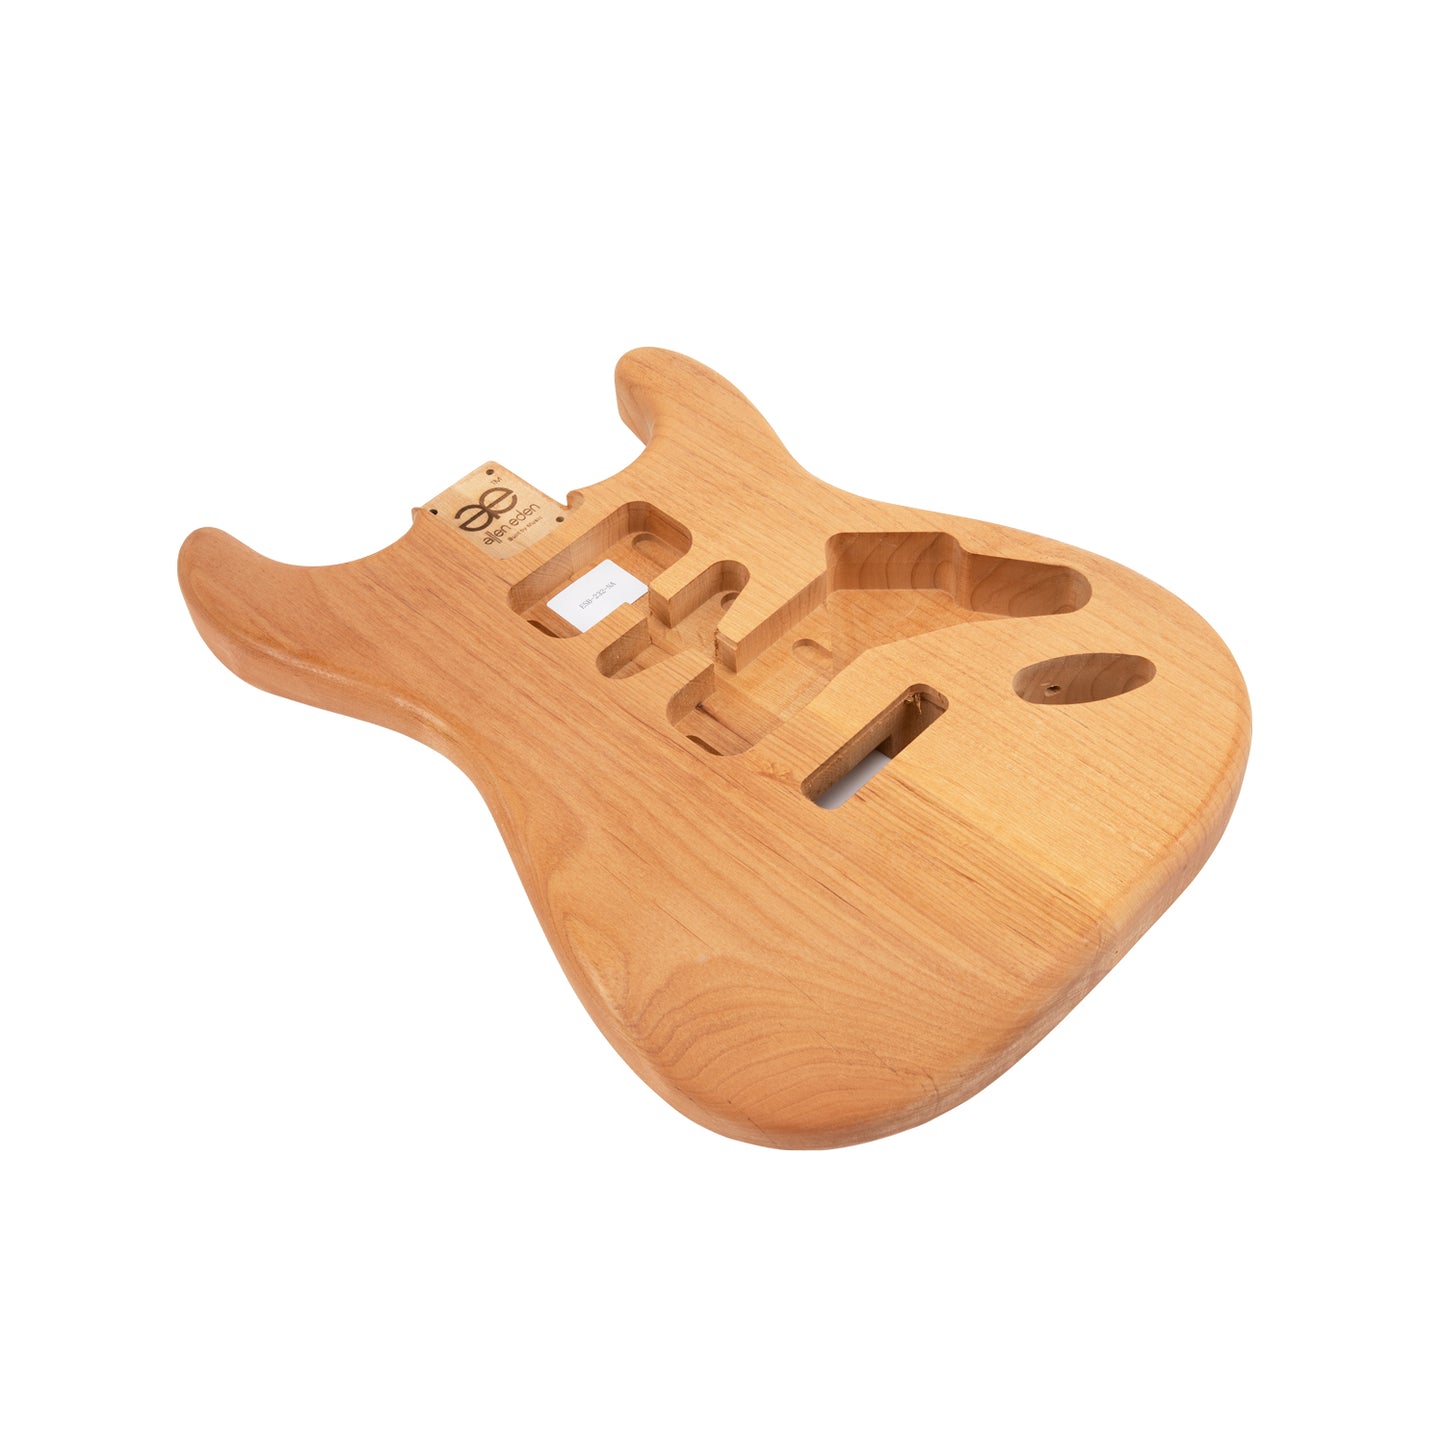 AE Guitars® S-Style Alder Replacement Guitar Body Natural